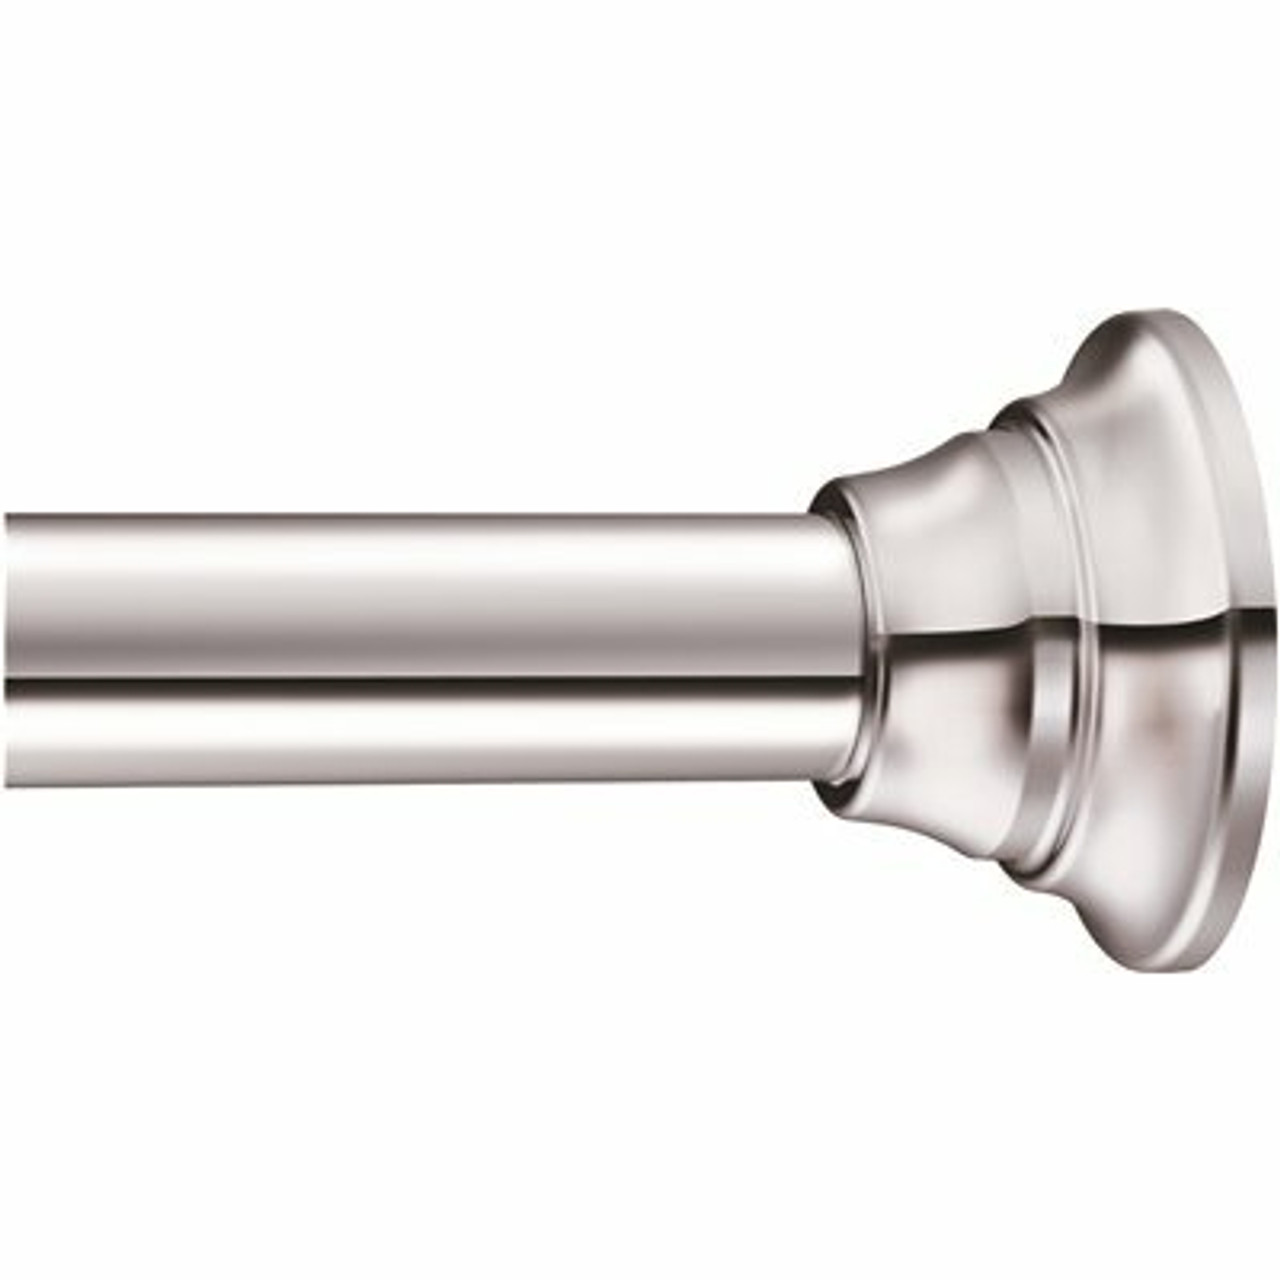 Moen 72 In. Adjustable Straight Decorative Tension Shower Rod In Chrome